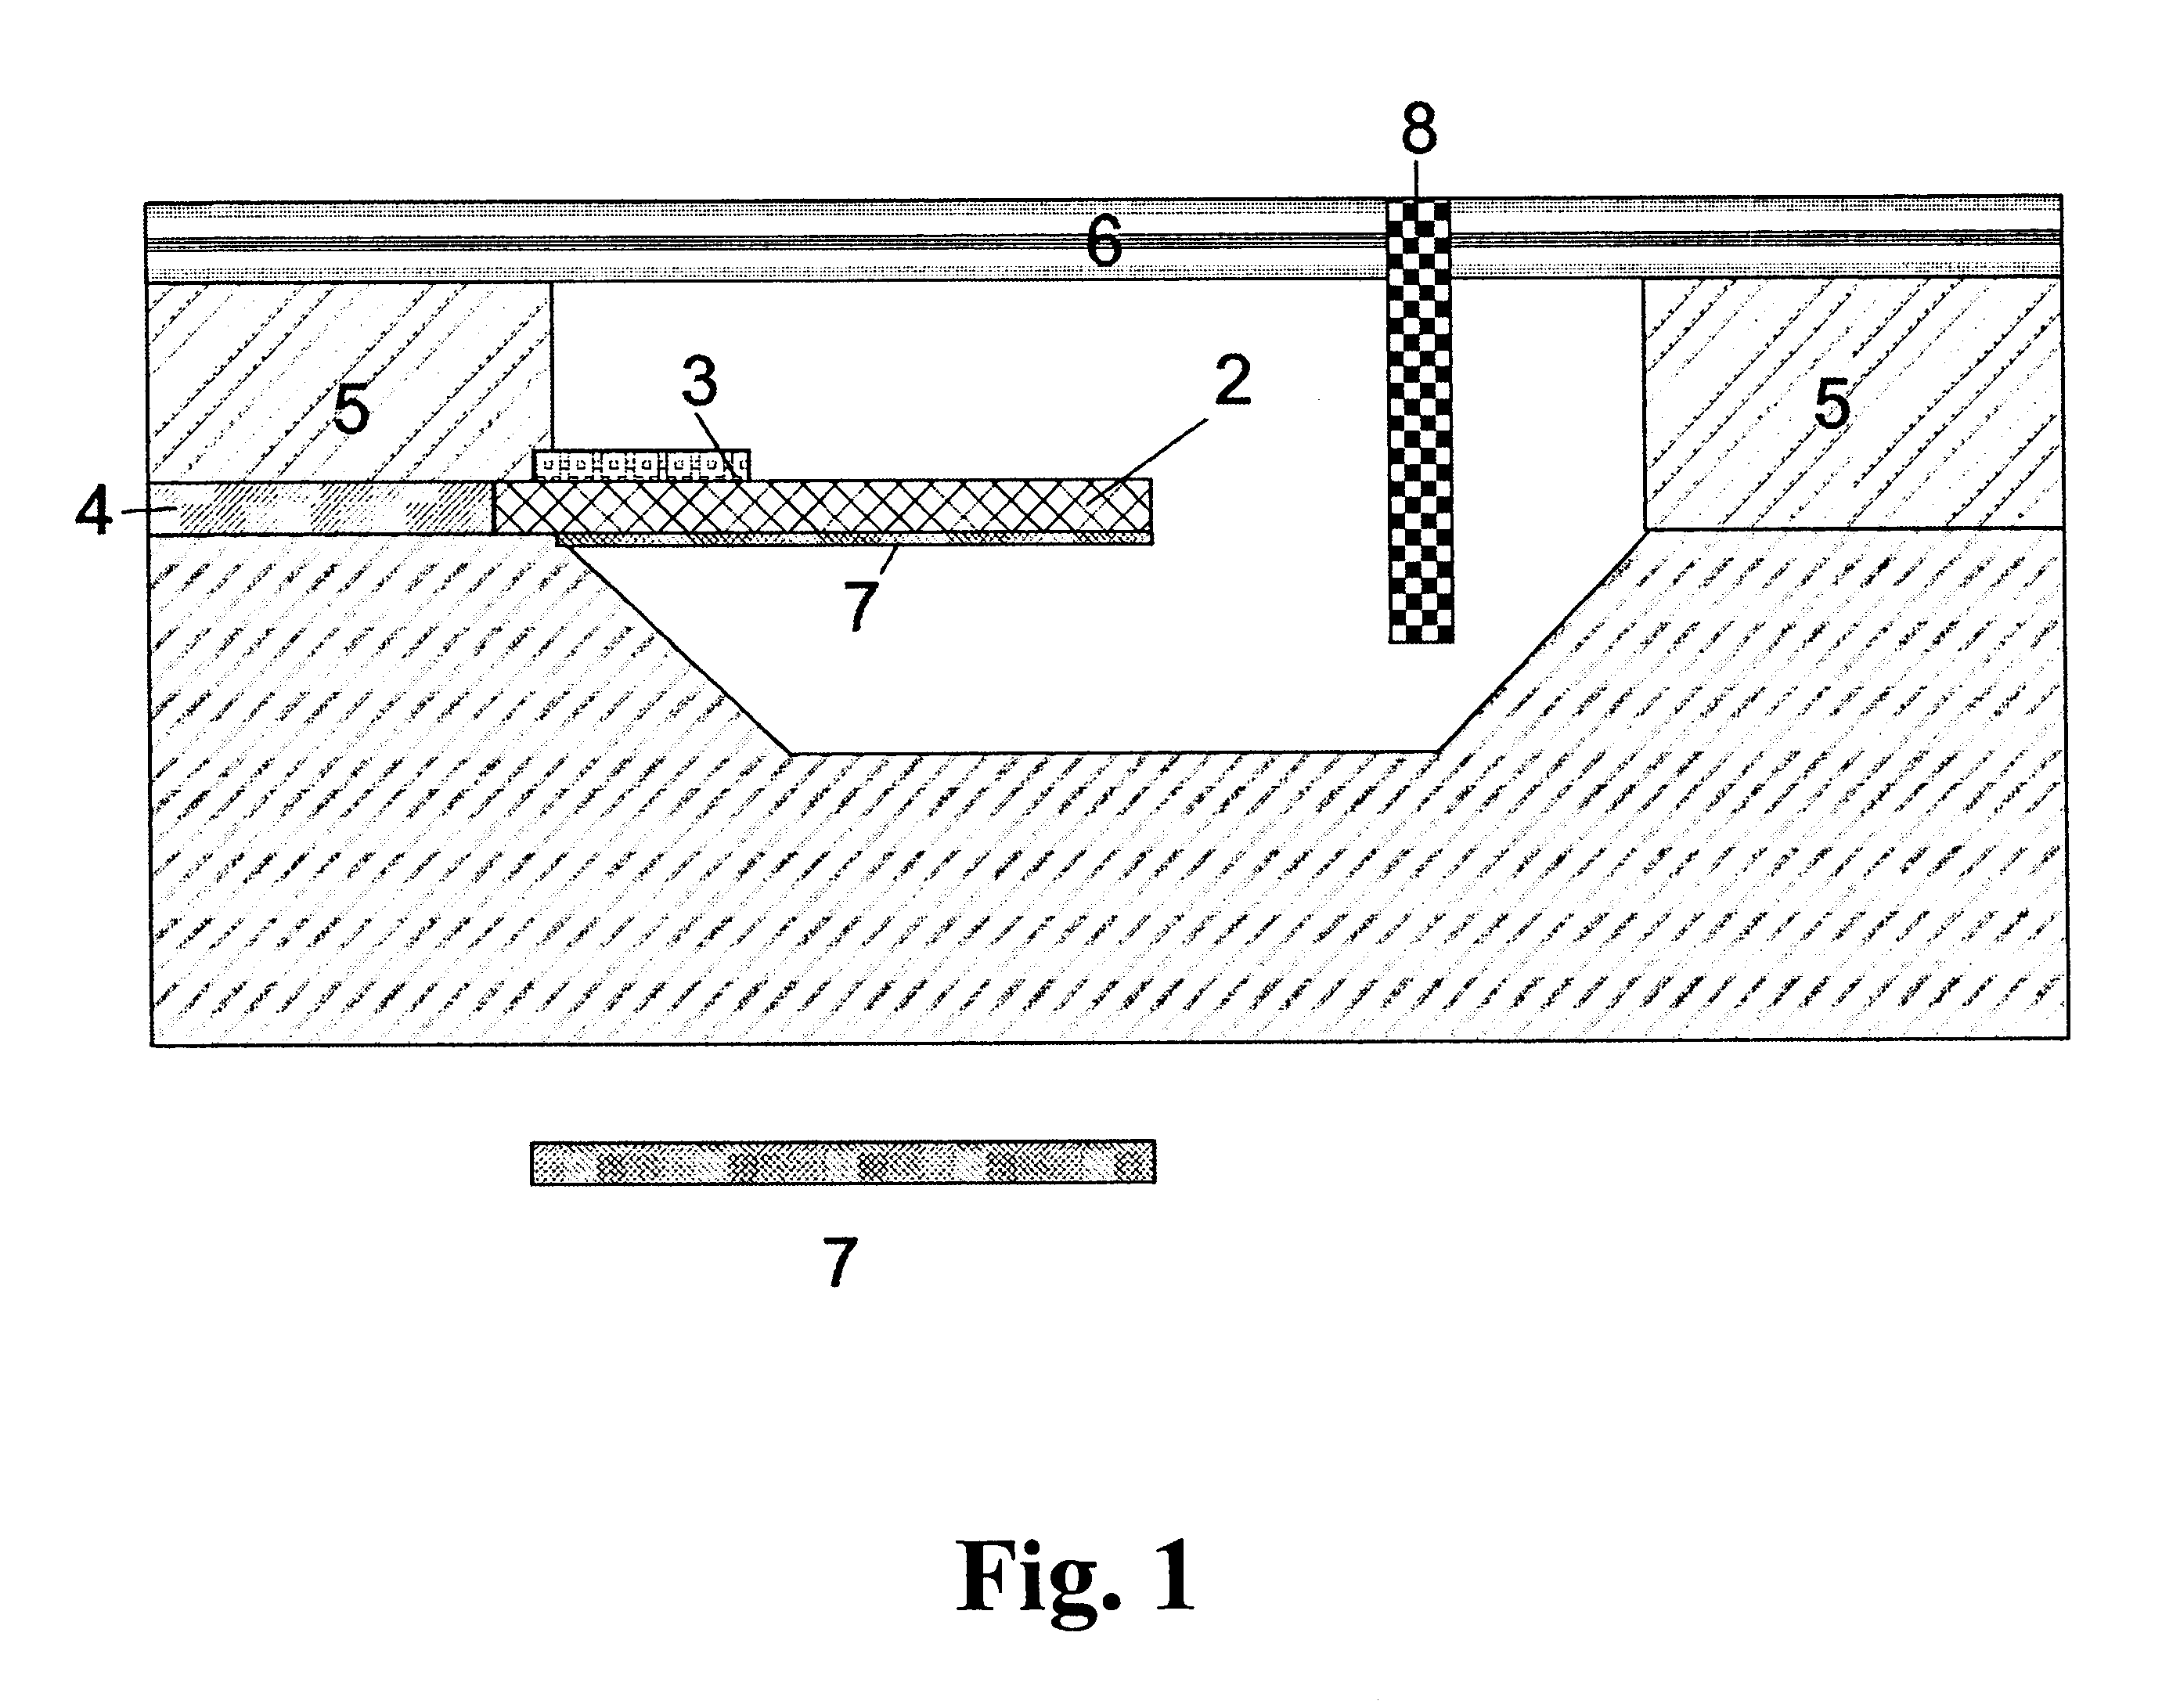 Transducer for microfluid handling system